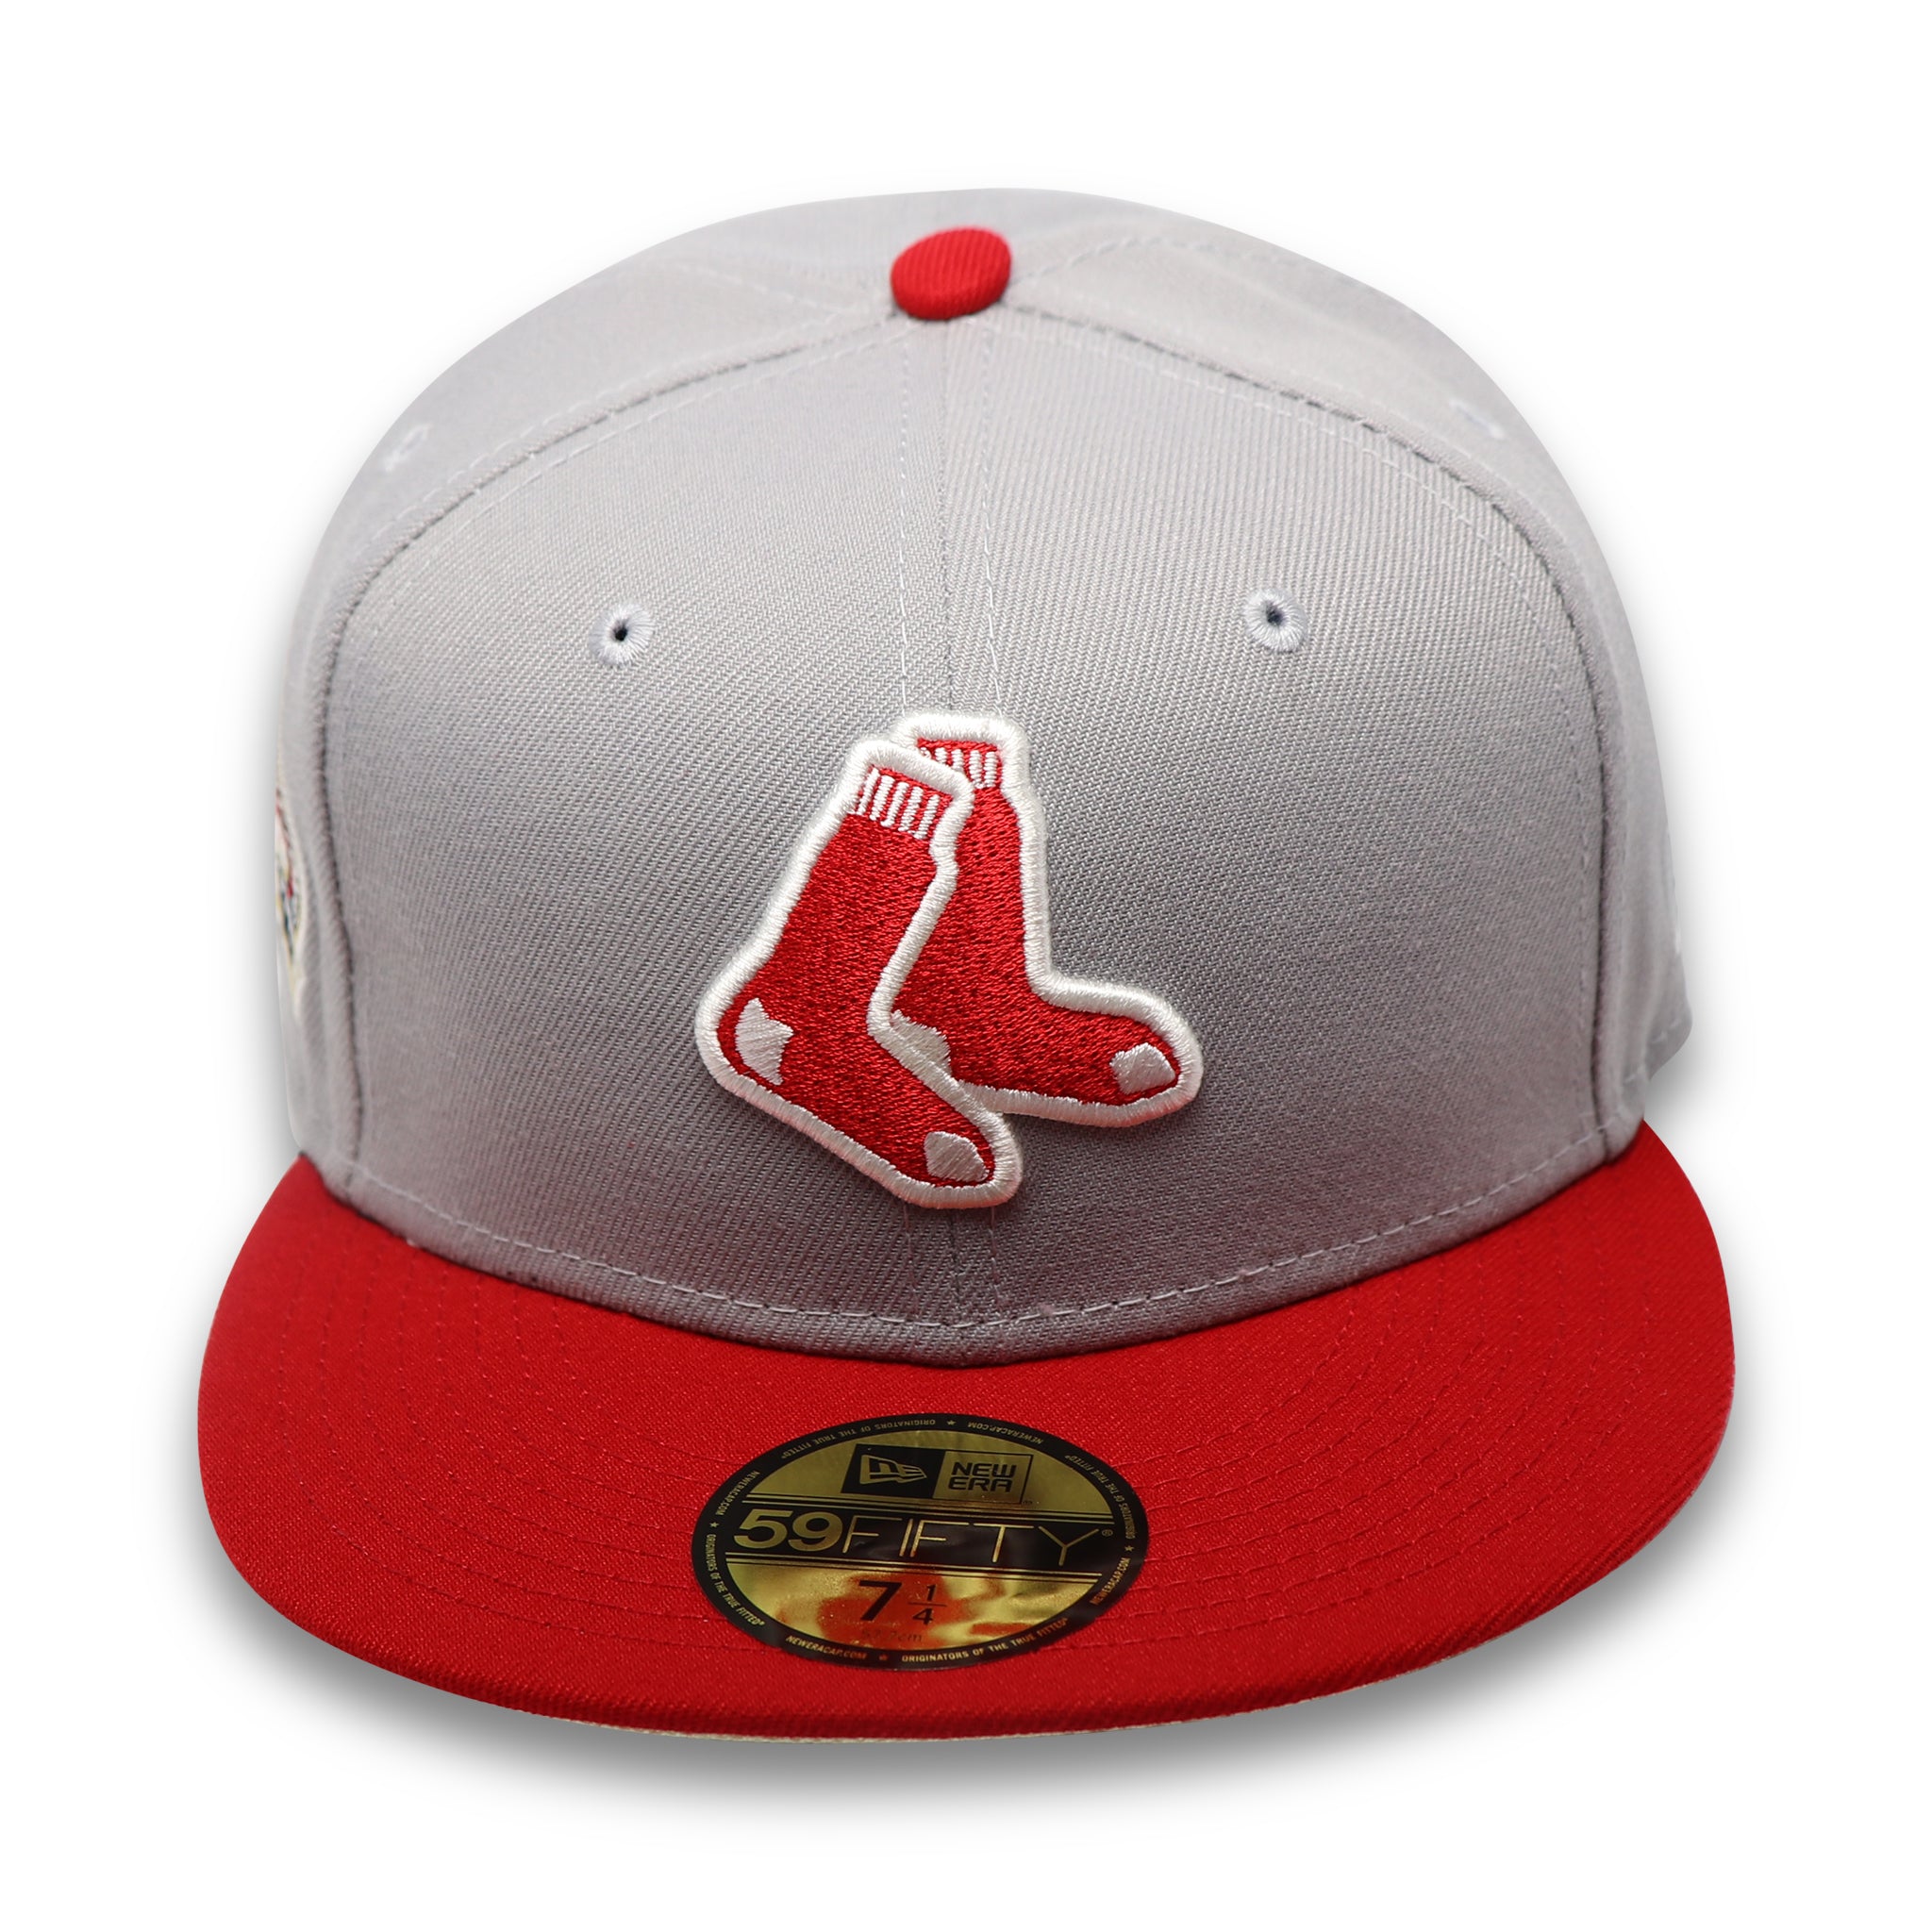 BOSTON REDSOX (GREY) (2004 CHAMPIONS) NEW ERA 59FIFTY FITTED (OFF WHITE UNDER VISOR)